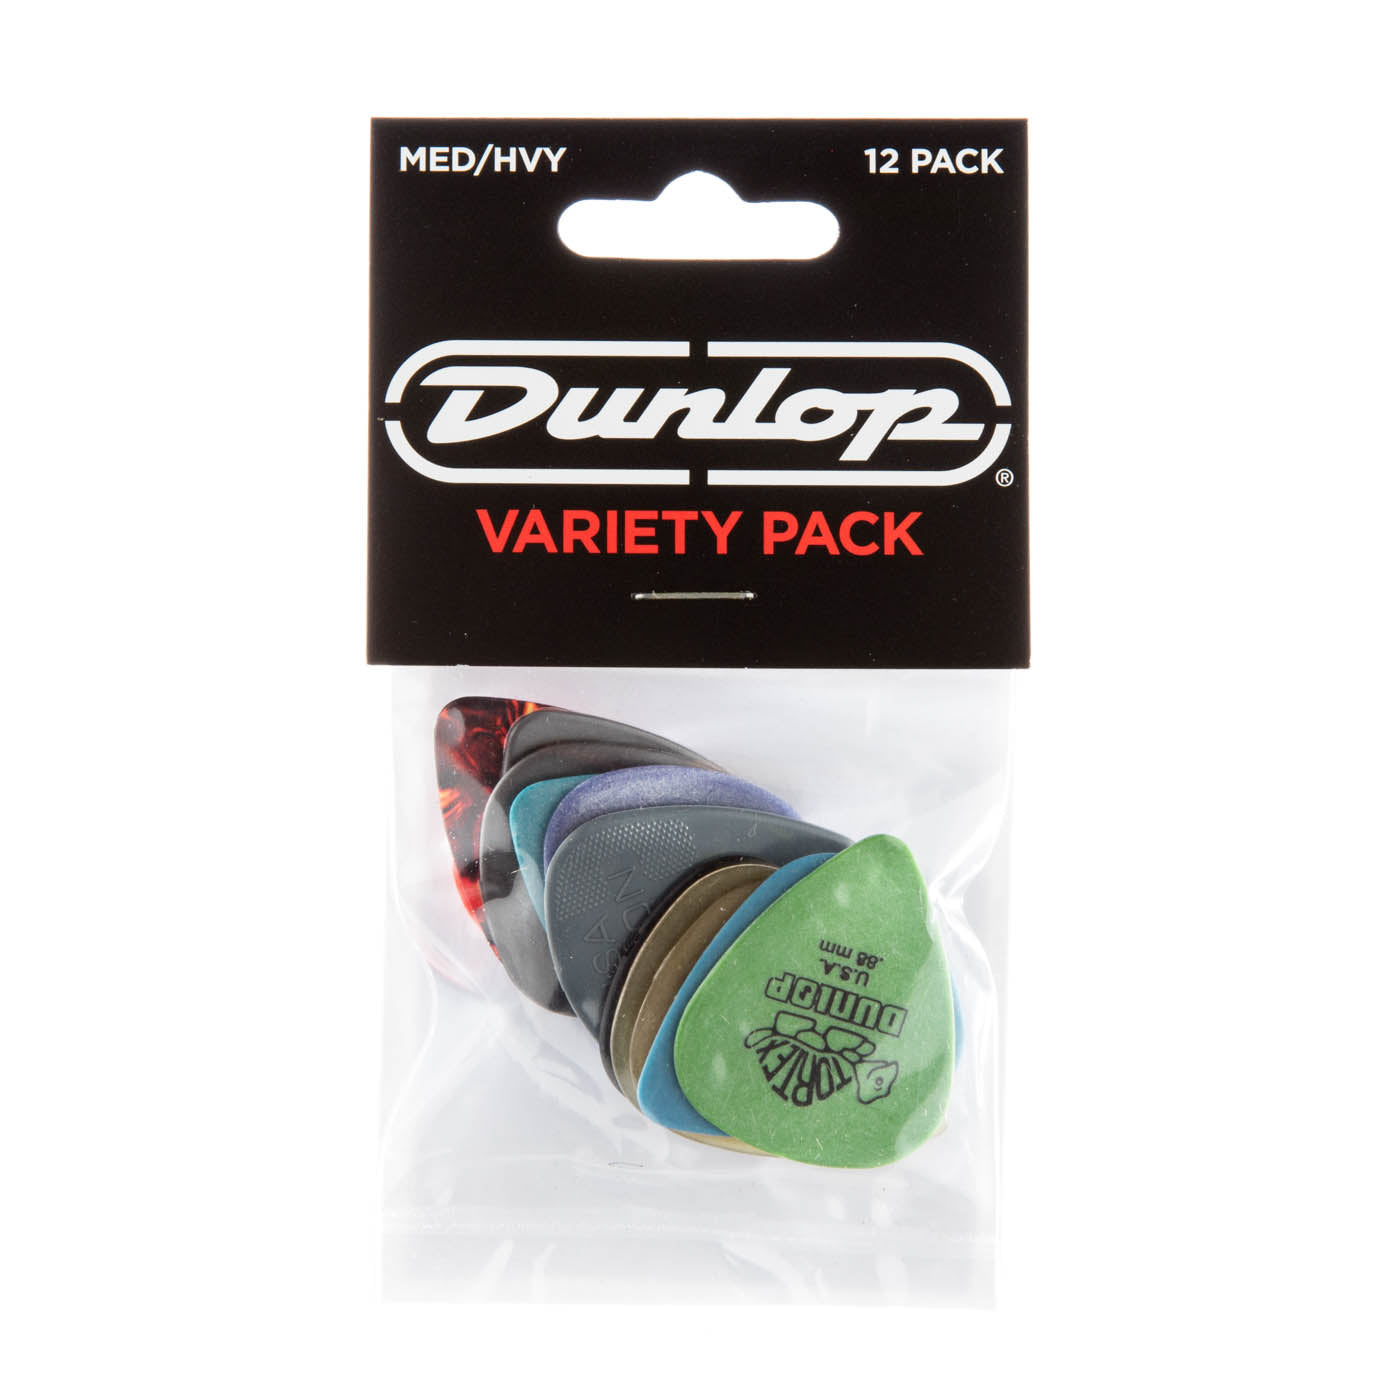 DUNLOP PVP102 Variety Pack Med/Heavy